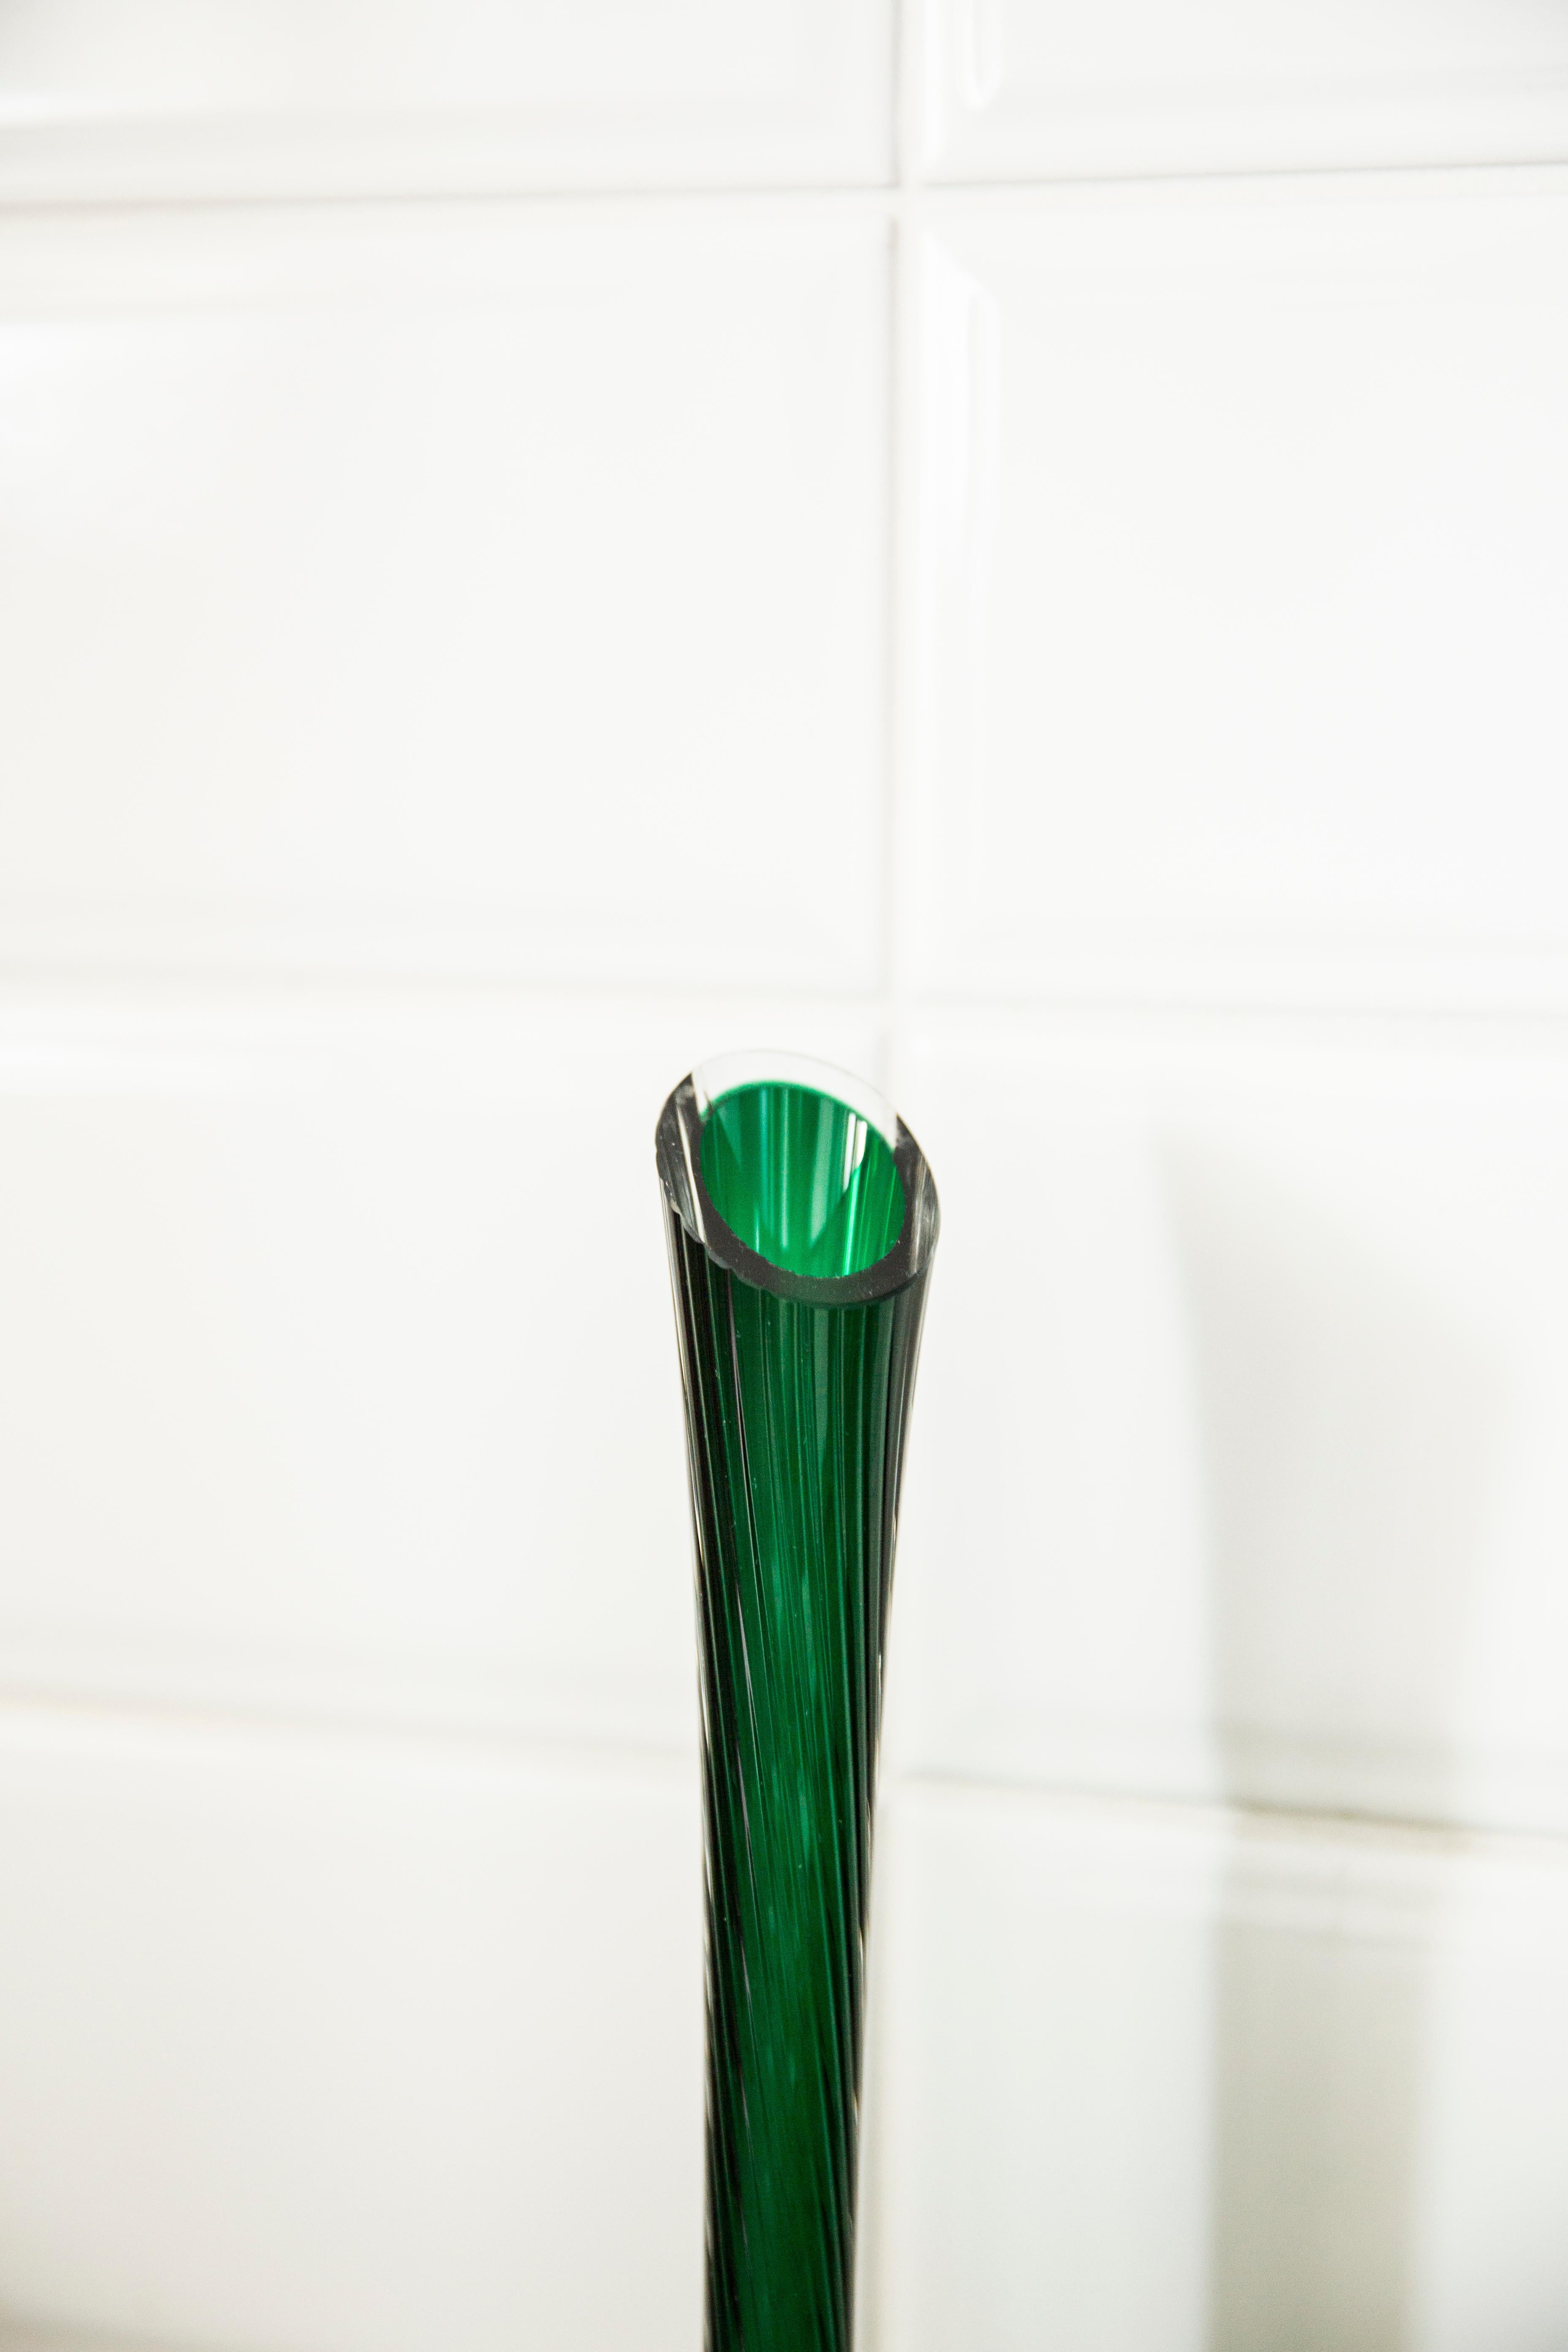 Midcentury Tall Green Vase, Europe, 1960s For Sale 2